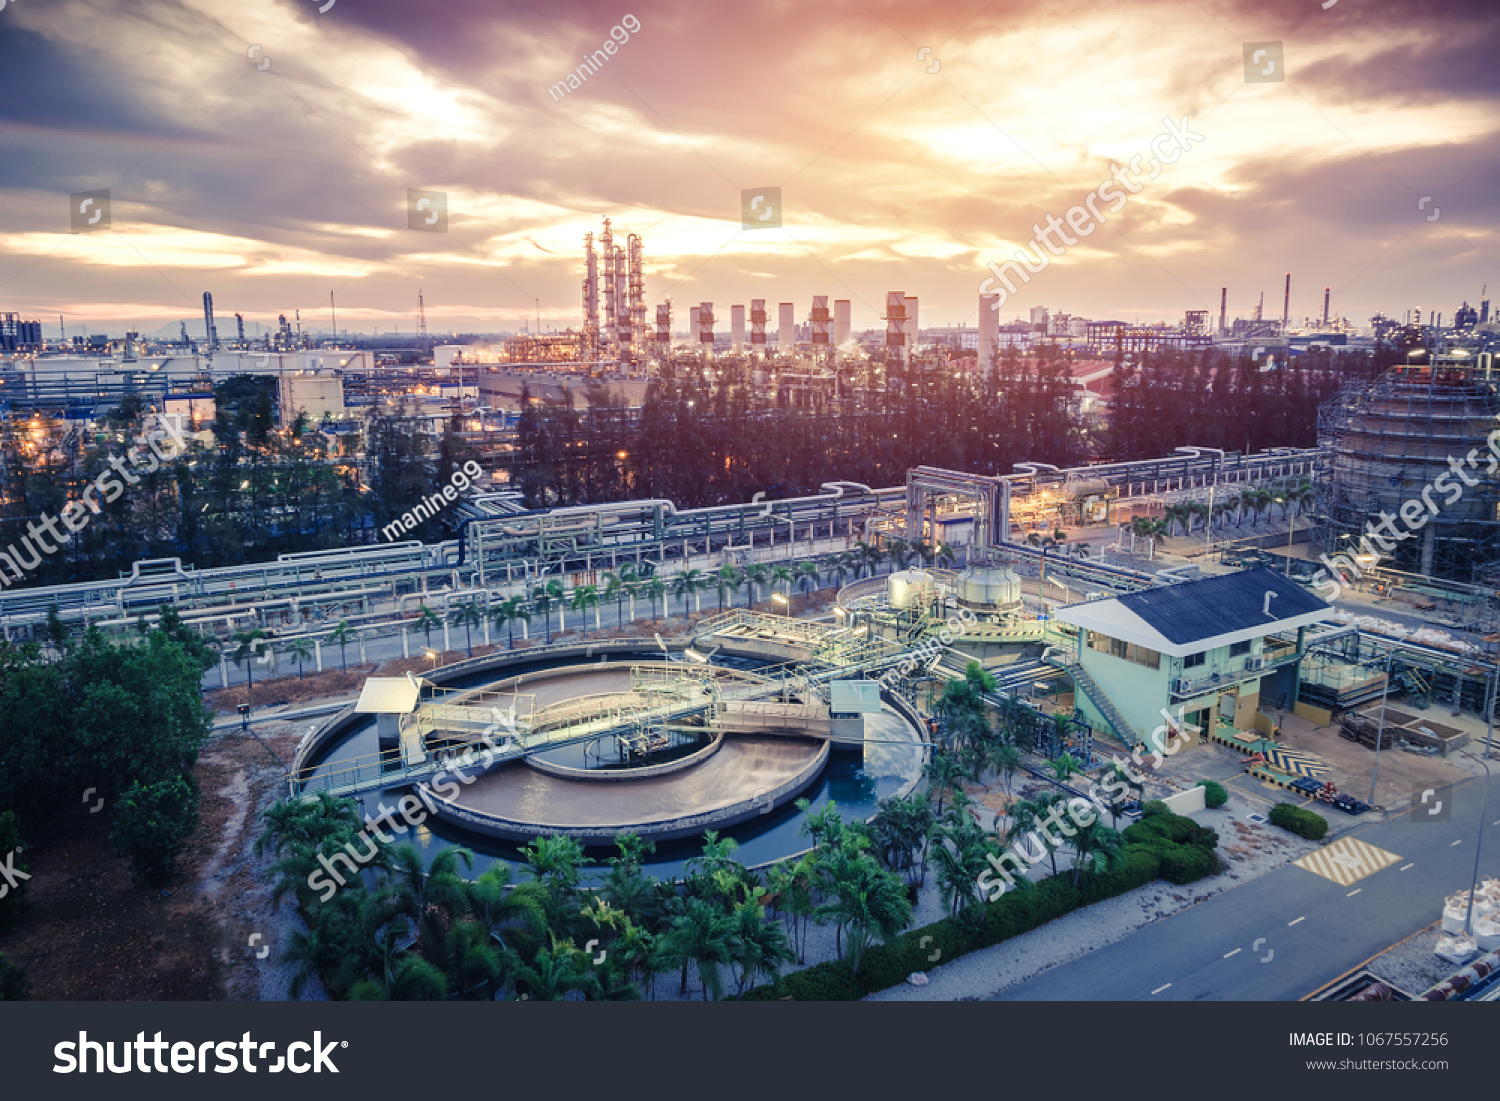 Petrochemical industrial estate on sunrise sky background with Wastewater treatment plant #1067557256